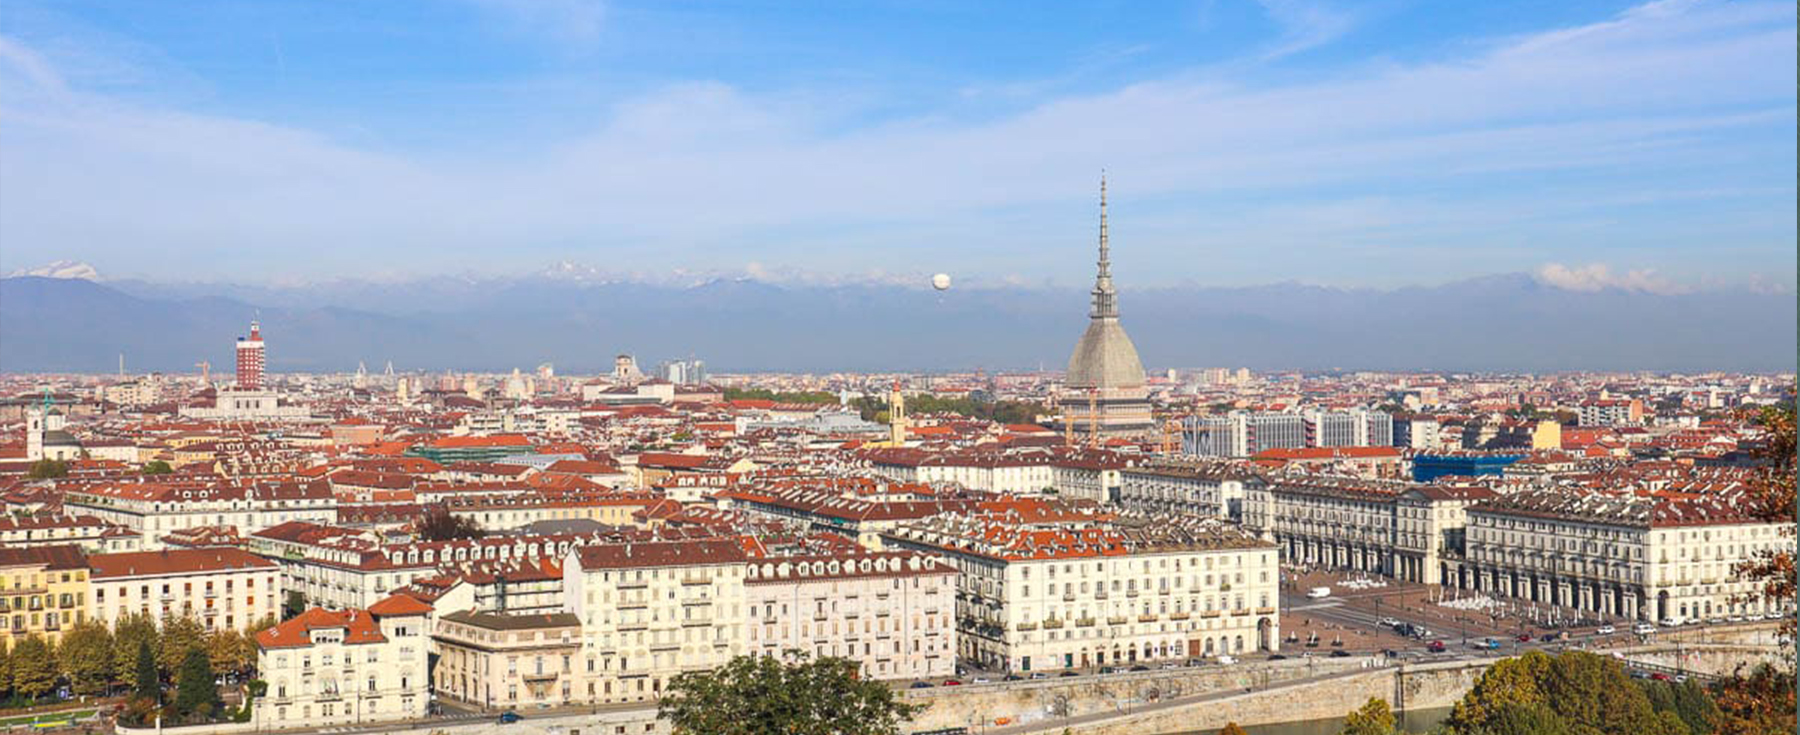 Let us take you on a journey to Turin!